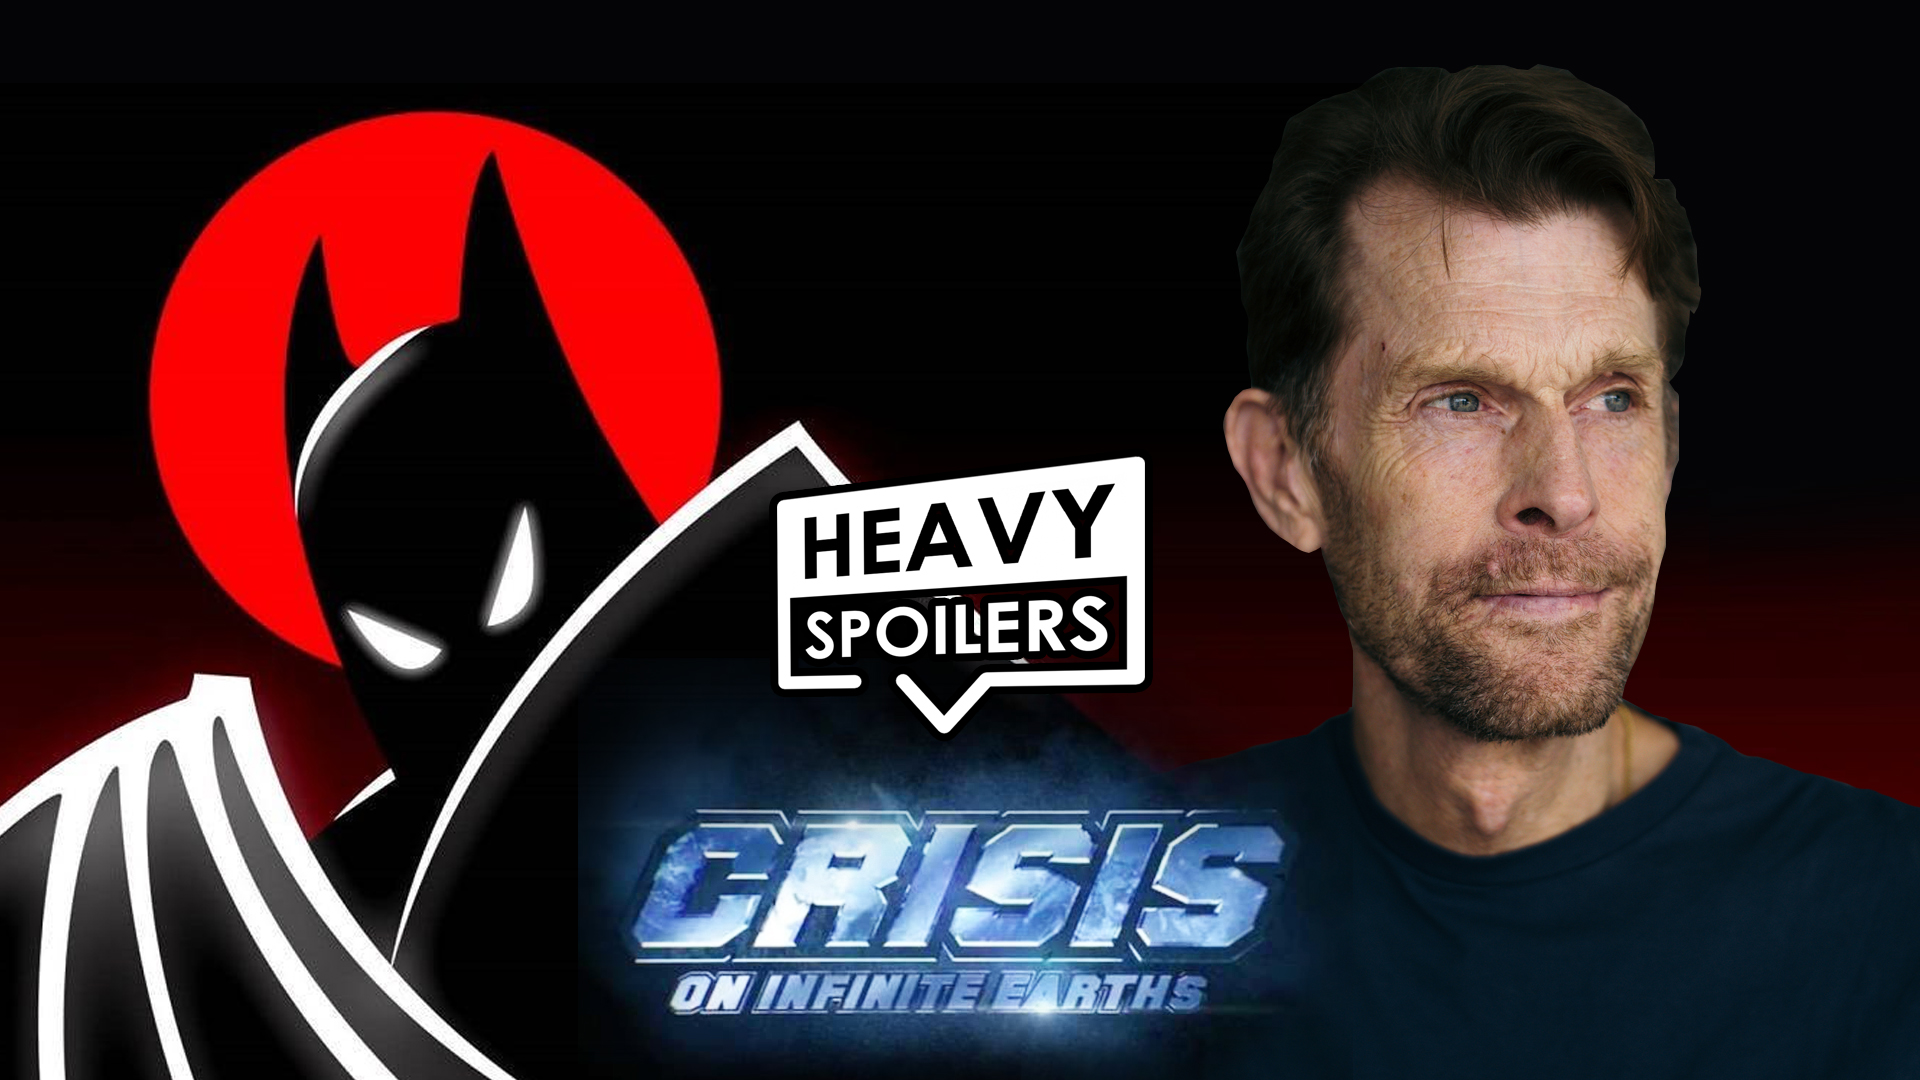 KEVIN CONROY TO FINALLY PLAY A LIVE ACTION VERSION OF BATMAN OLD BRUCE WAYNE IN THE CW CRISIS ON INFINITE EARTHS 2